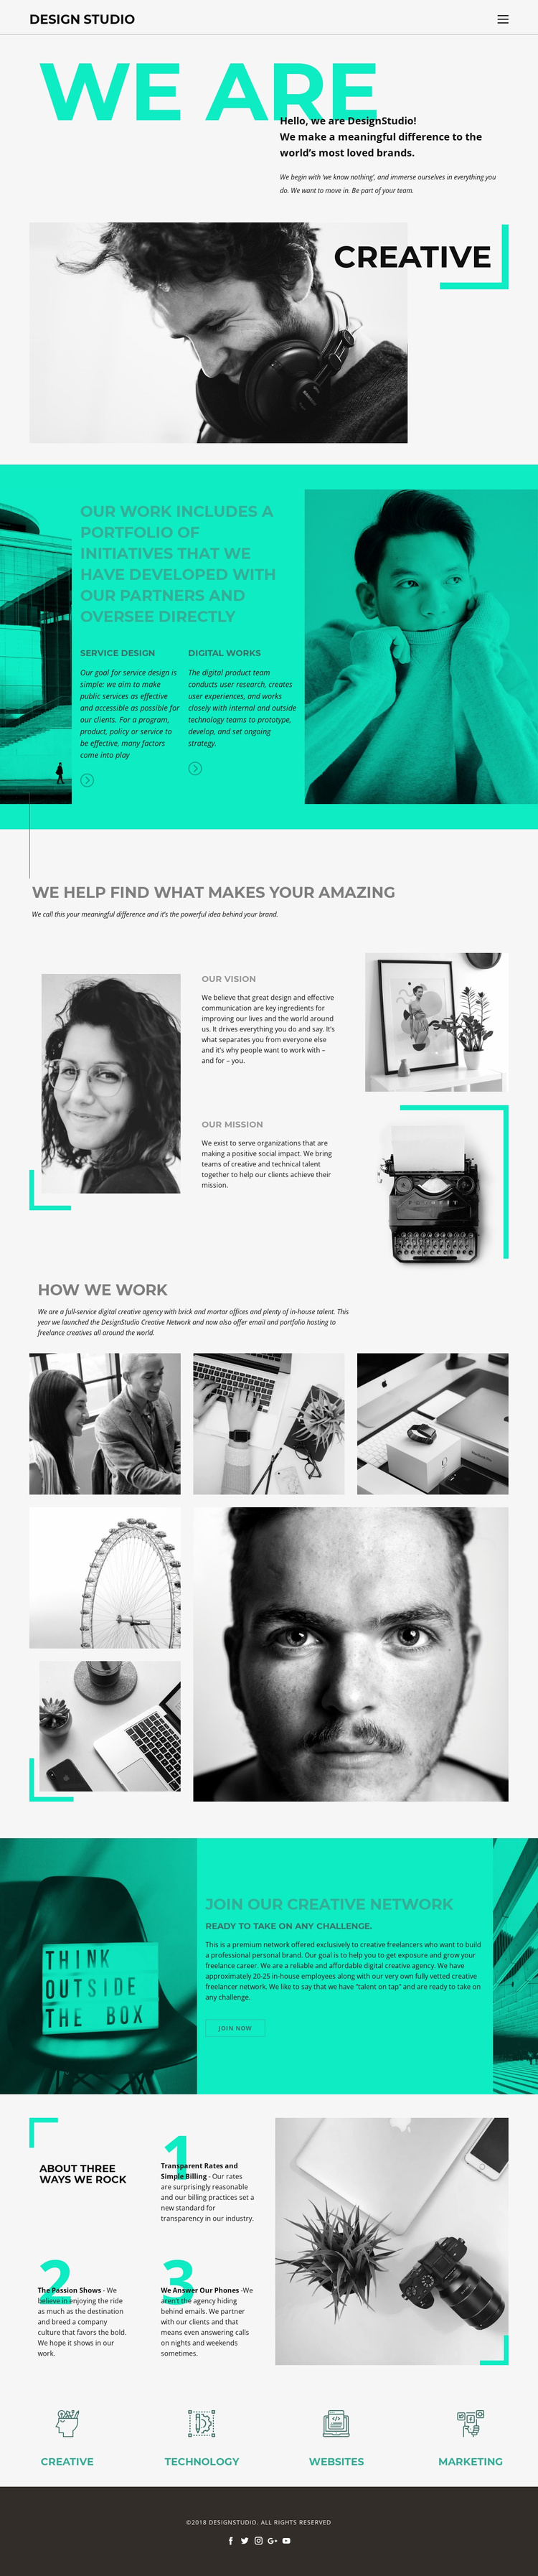 We are creative business Landing Page